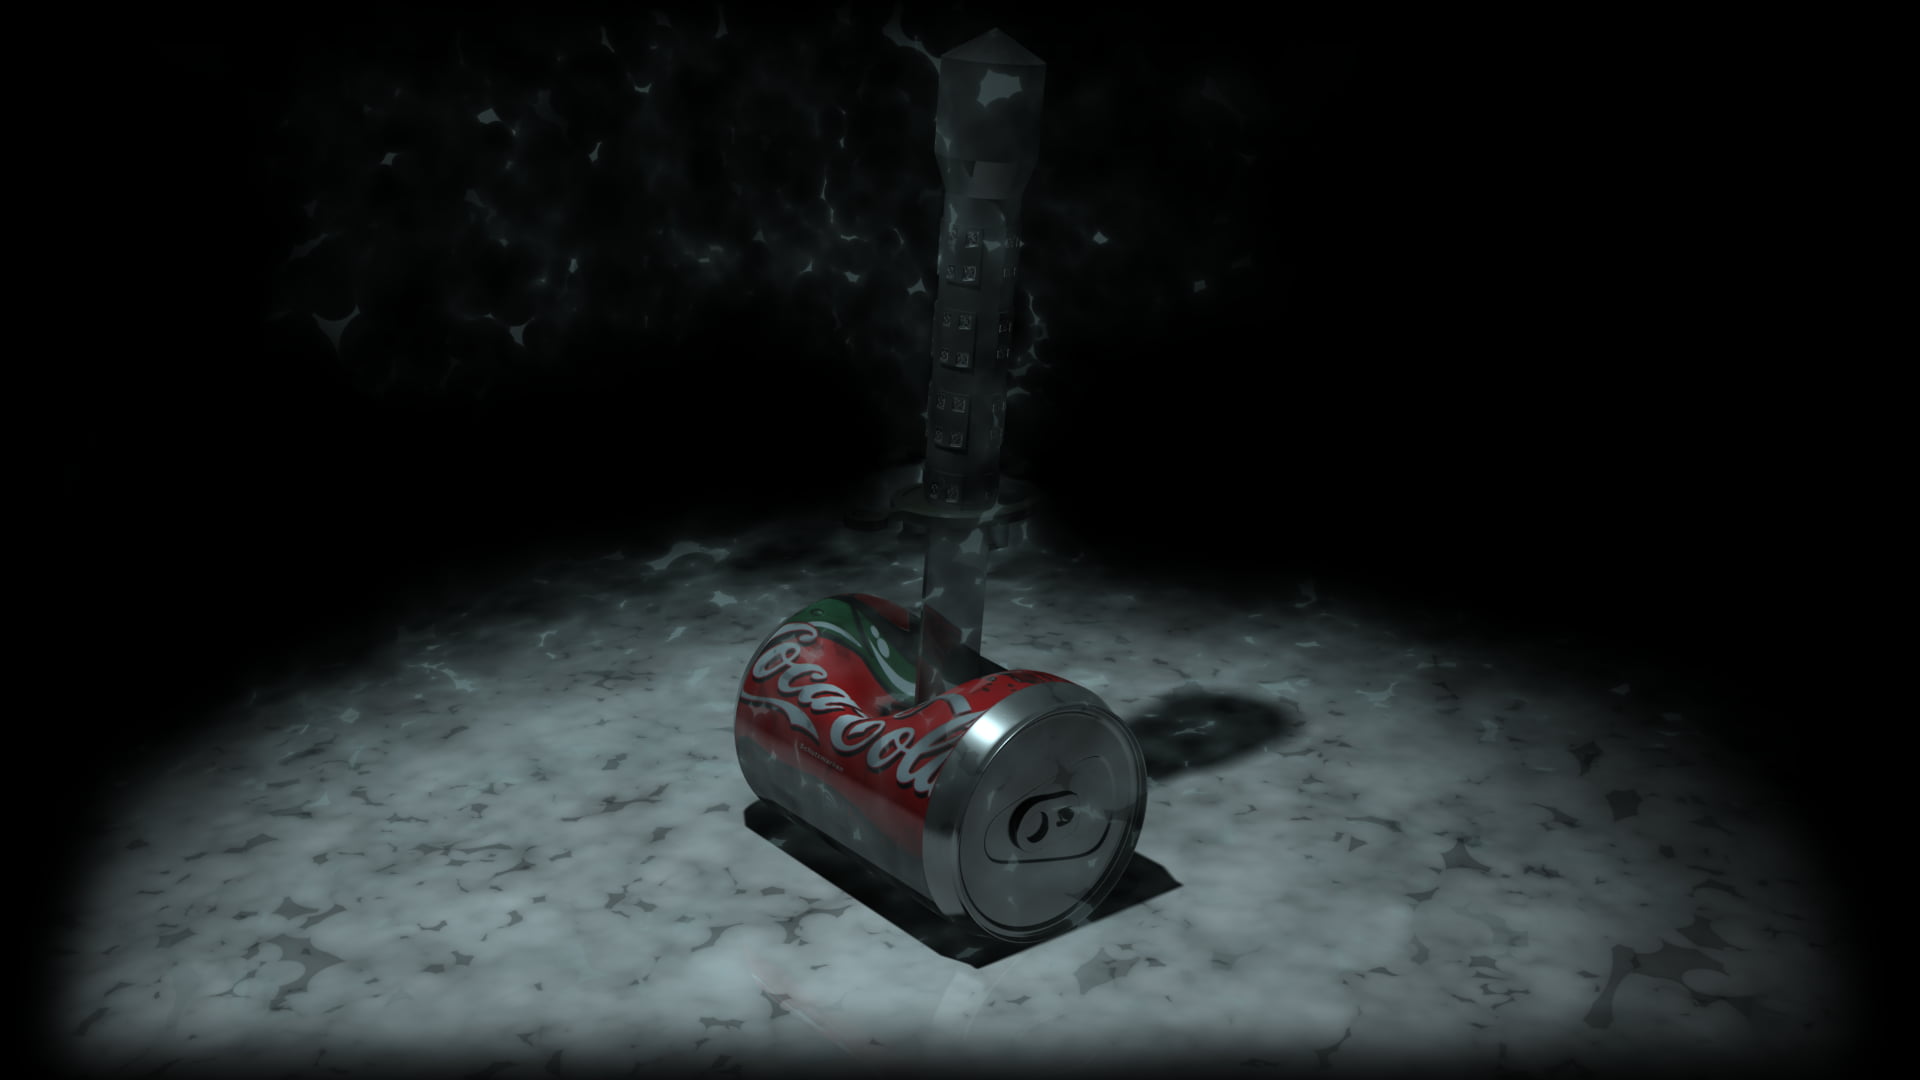 Coca-Cola can, smoke, 3D, communication, no people, indoors, text